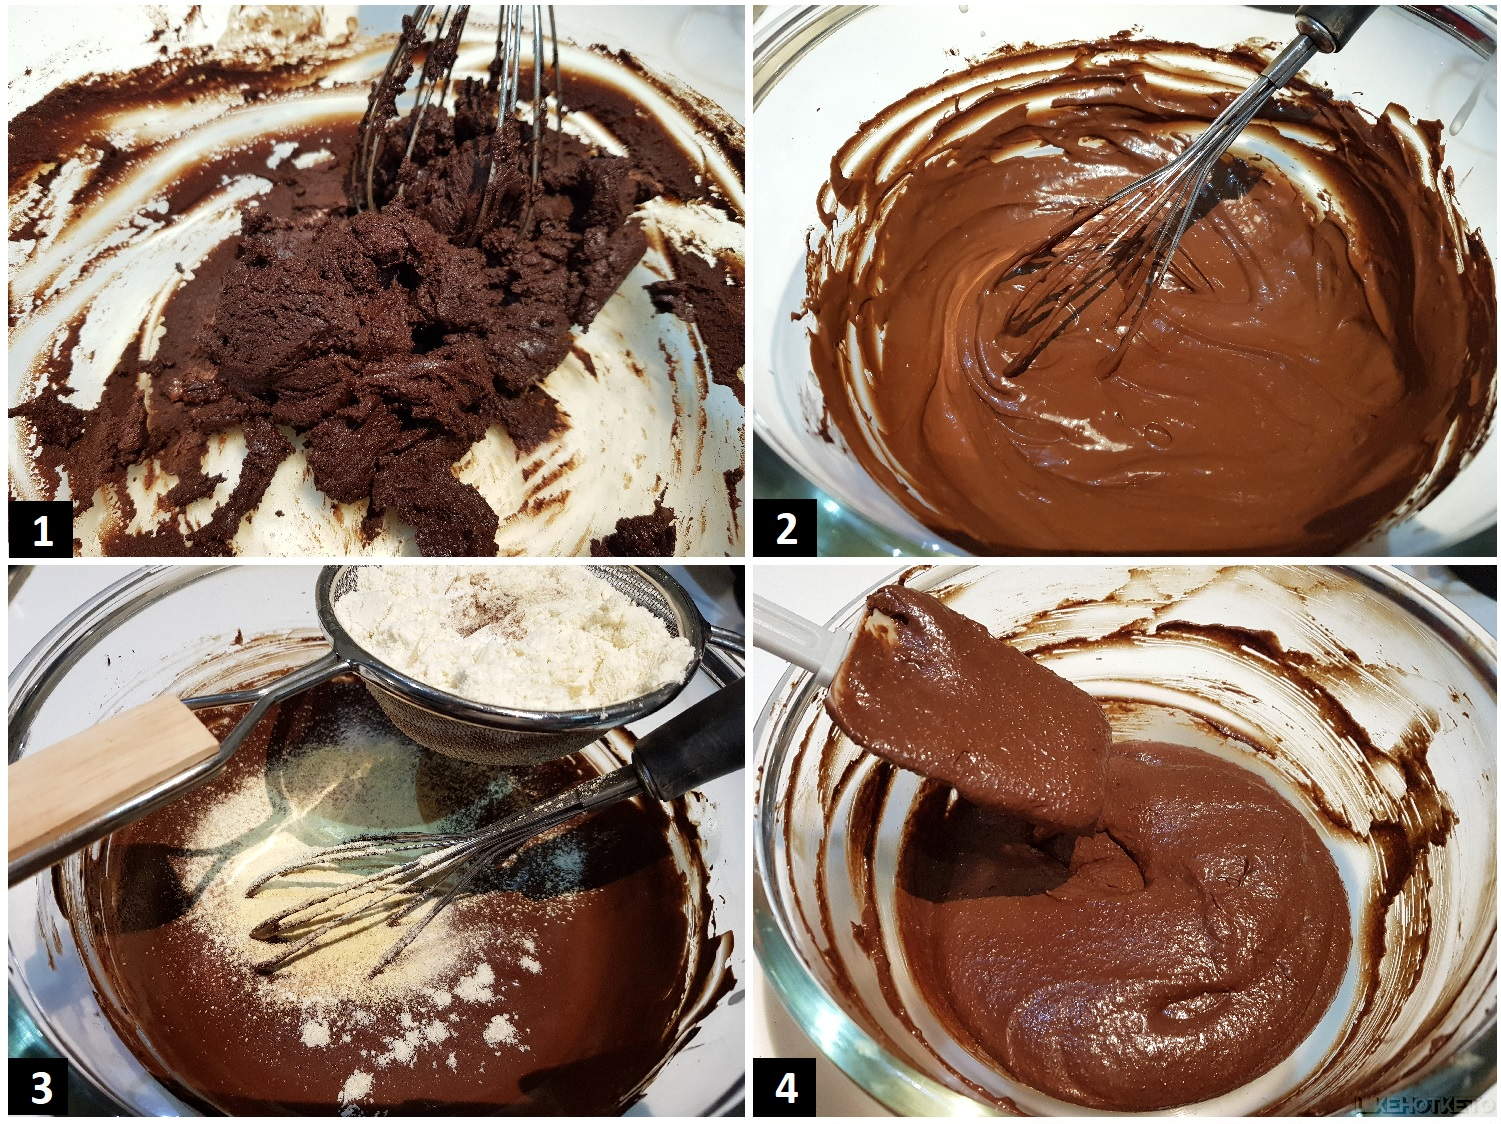 Step by step for the low-carb chocolate cupcakes batter.